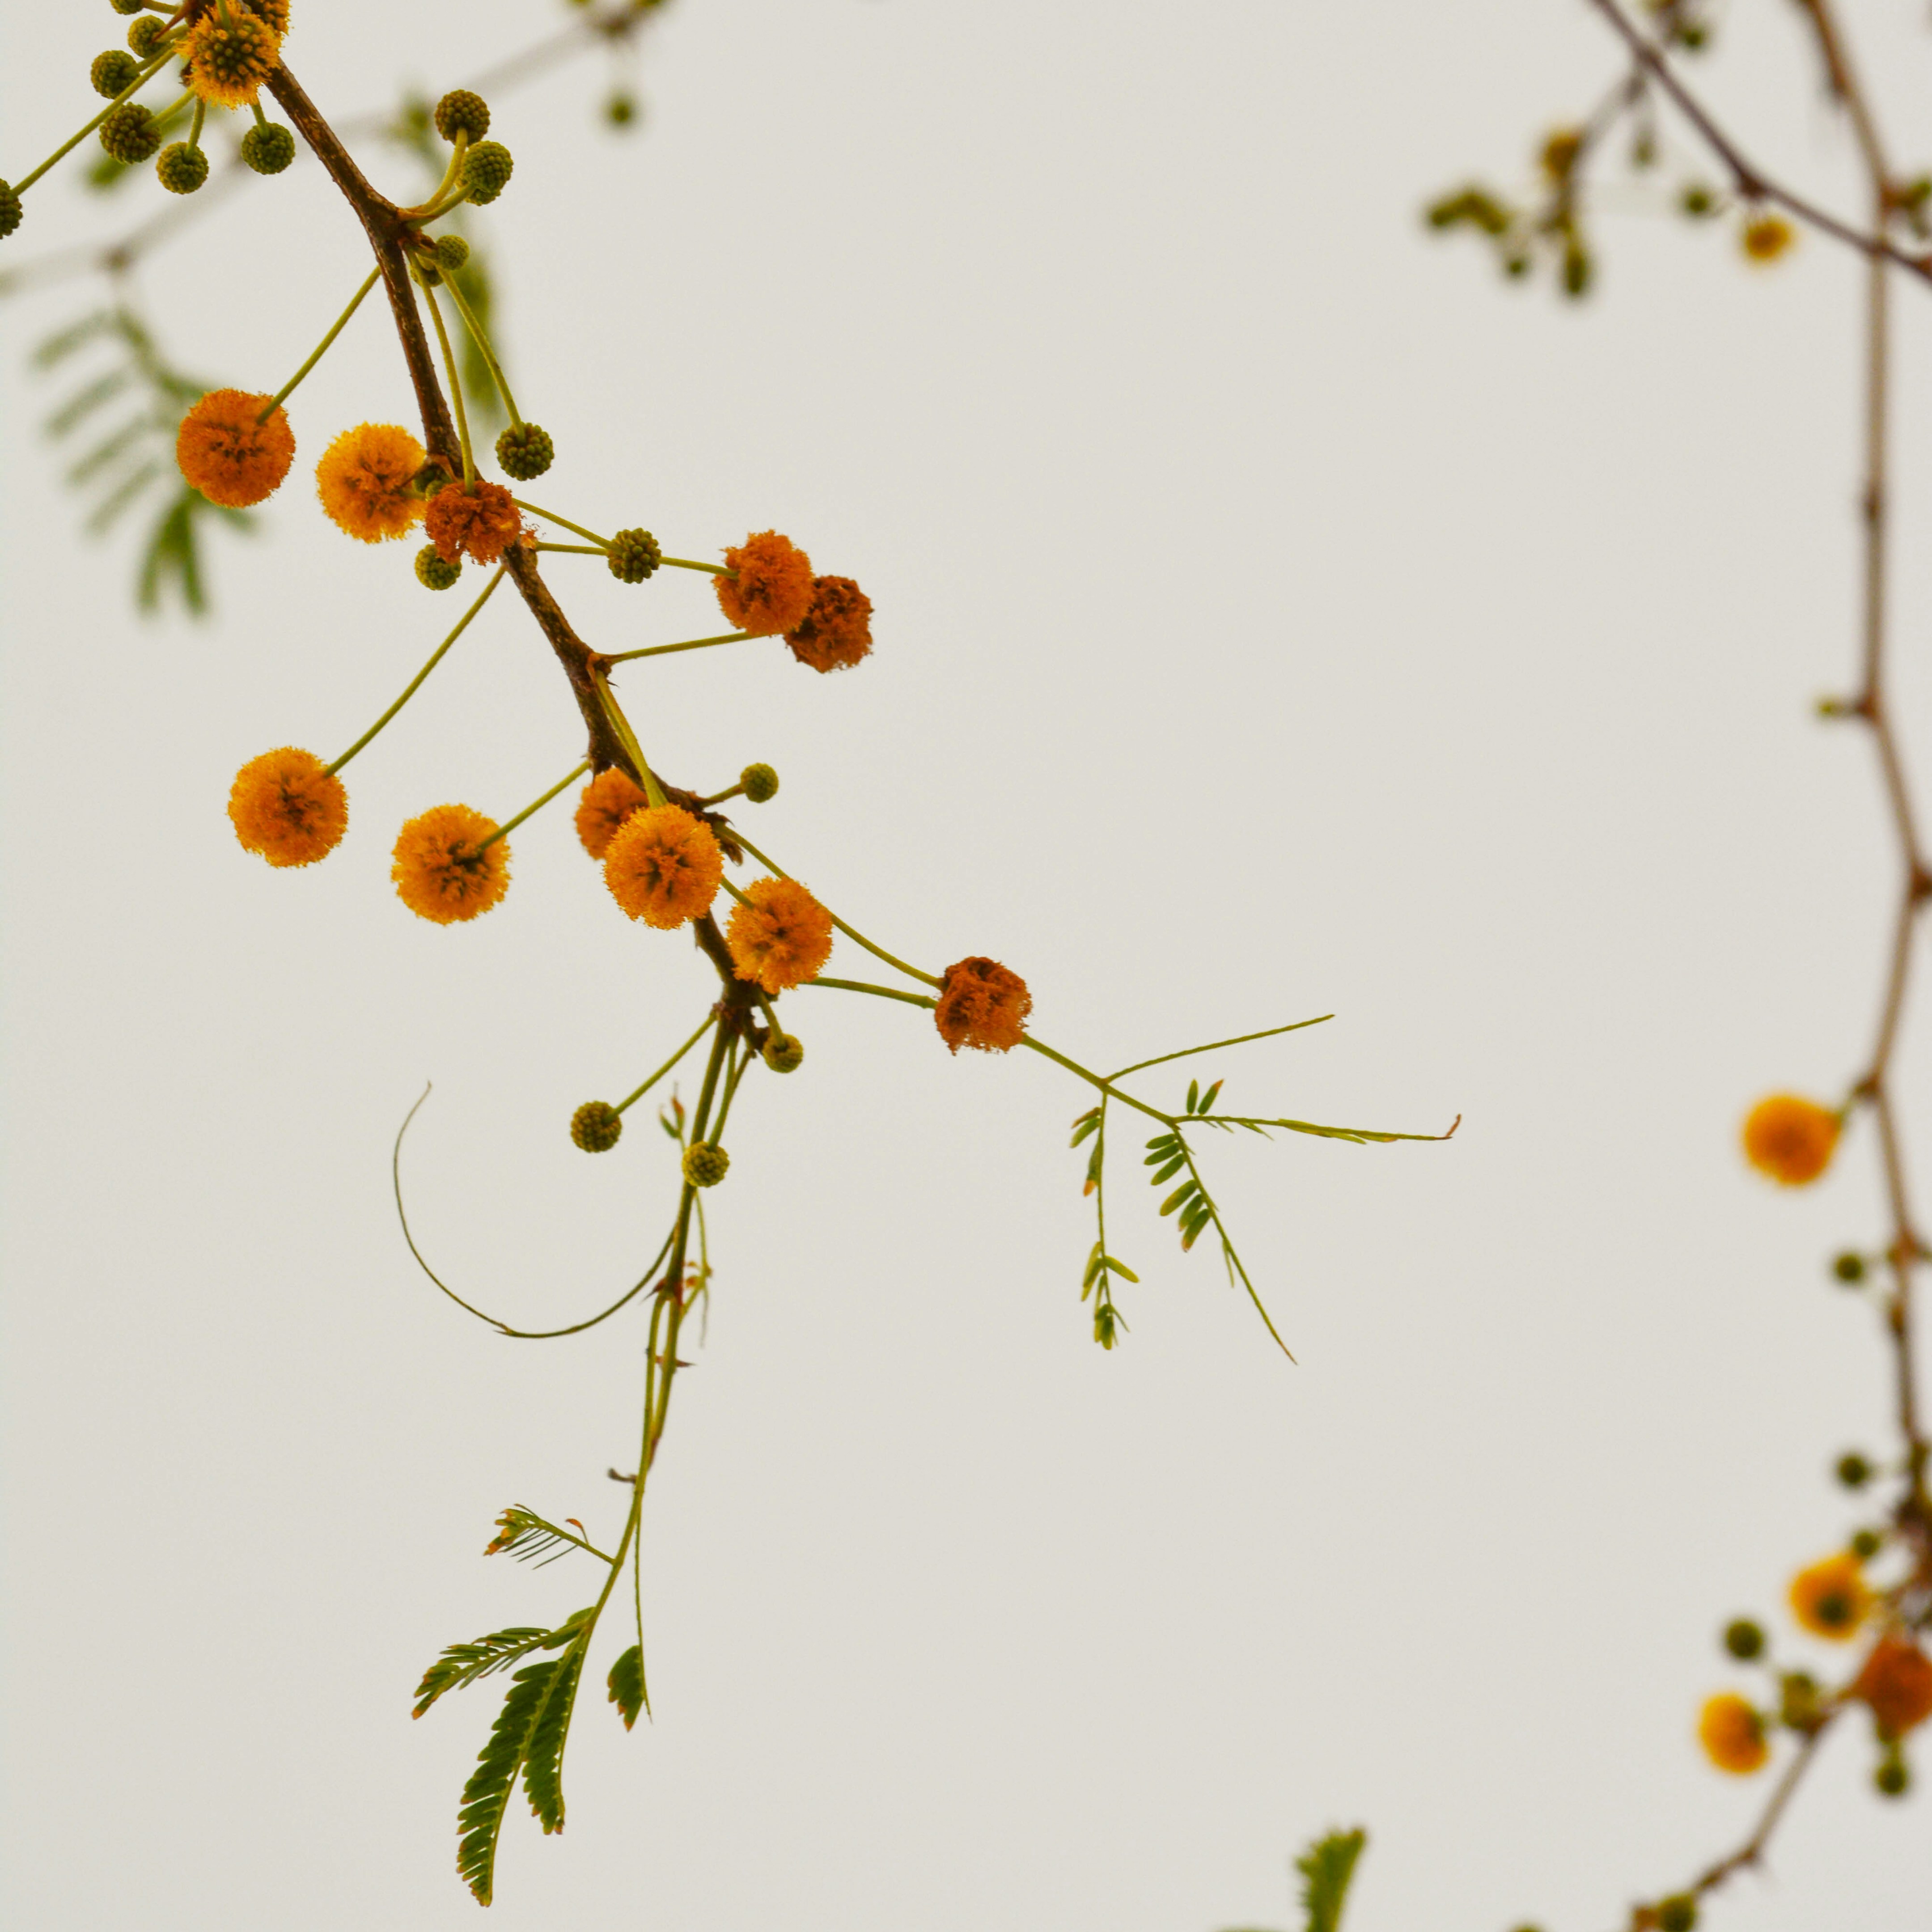 brown round fruits on tree branch